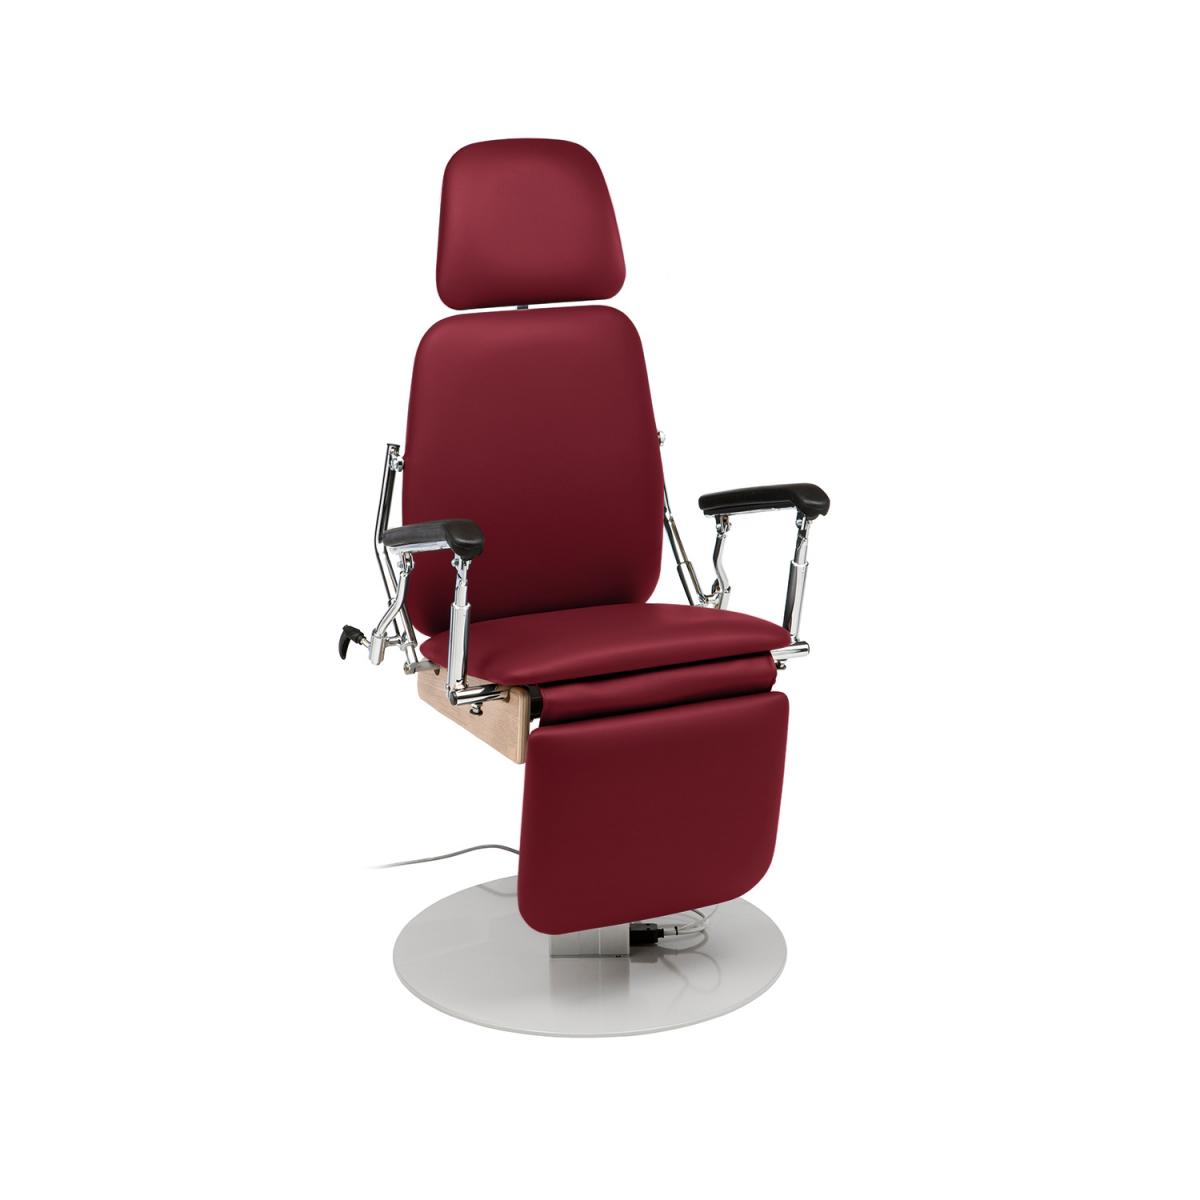 Nose/throat examination chair 401